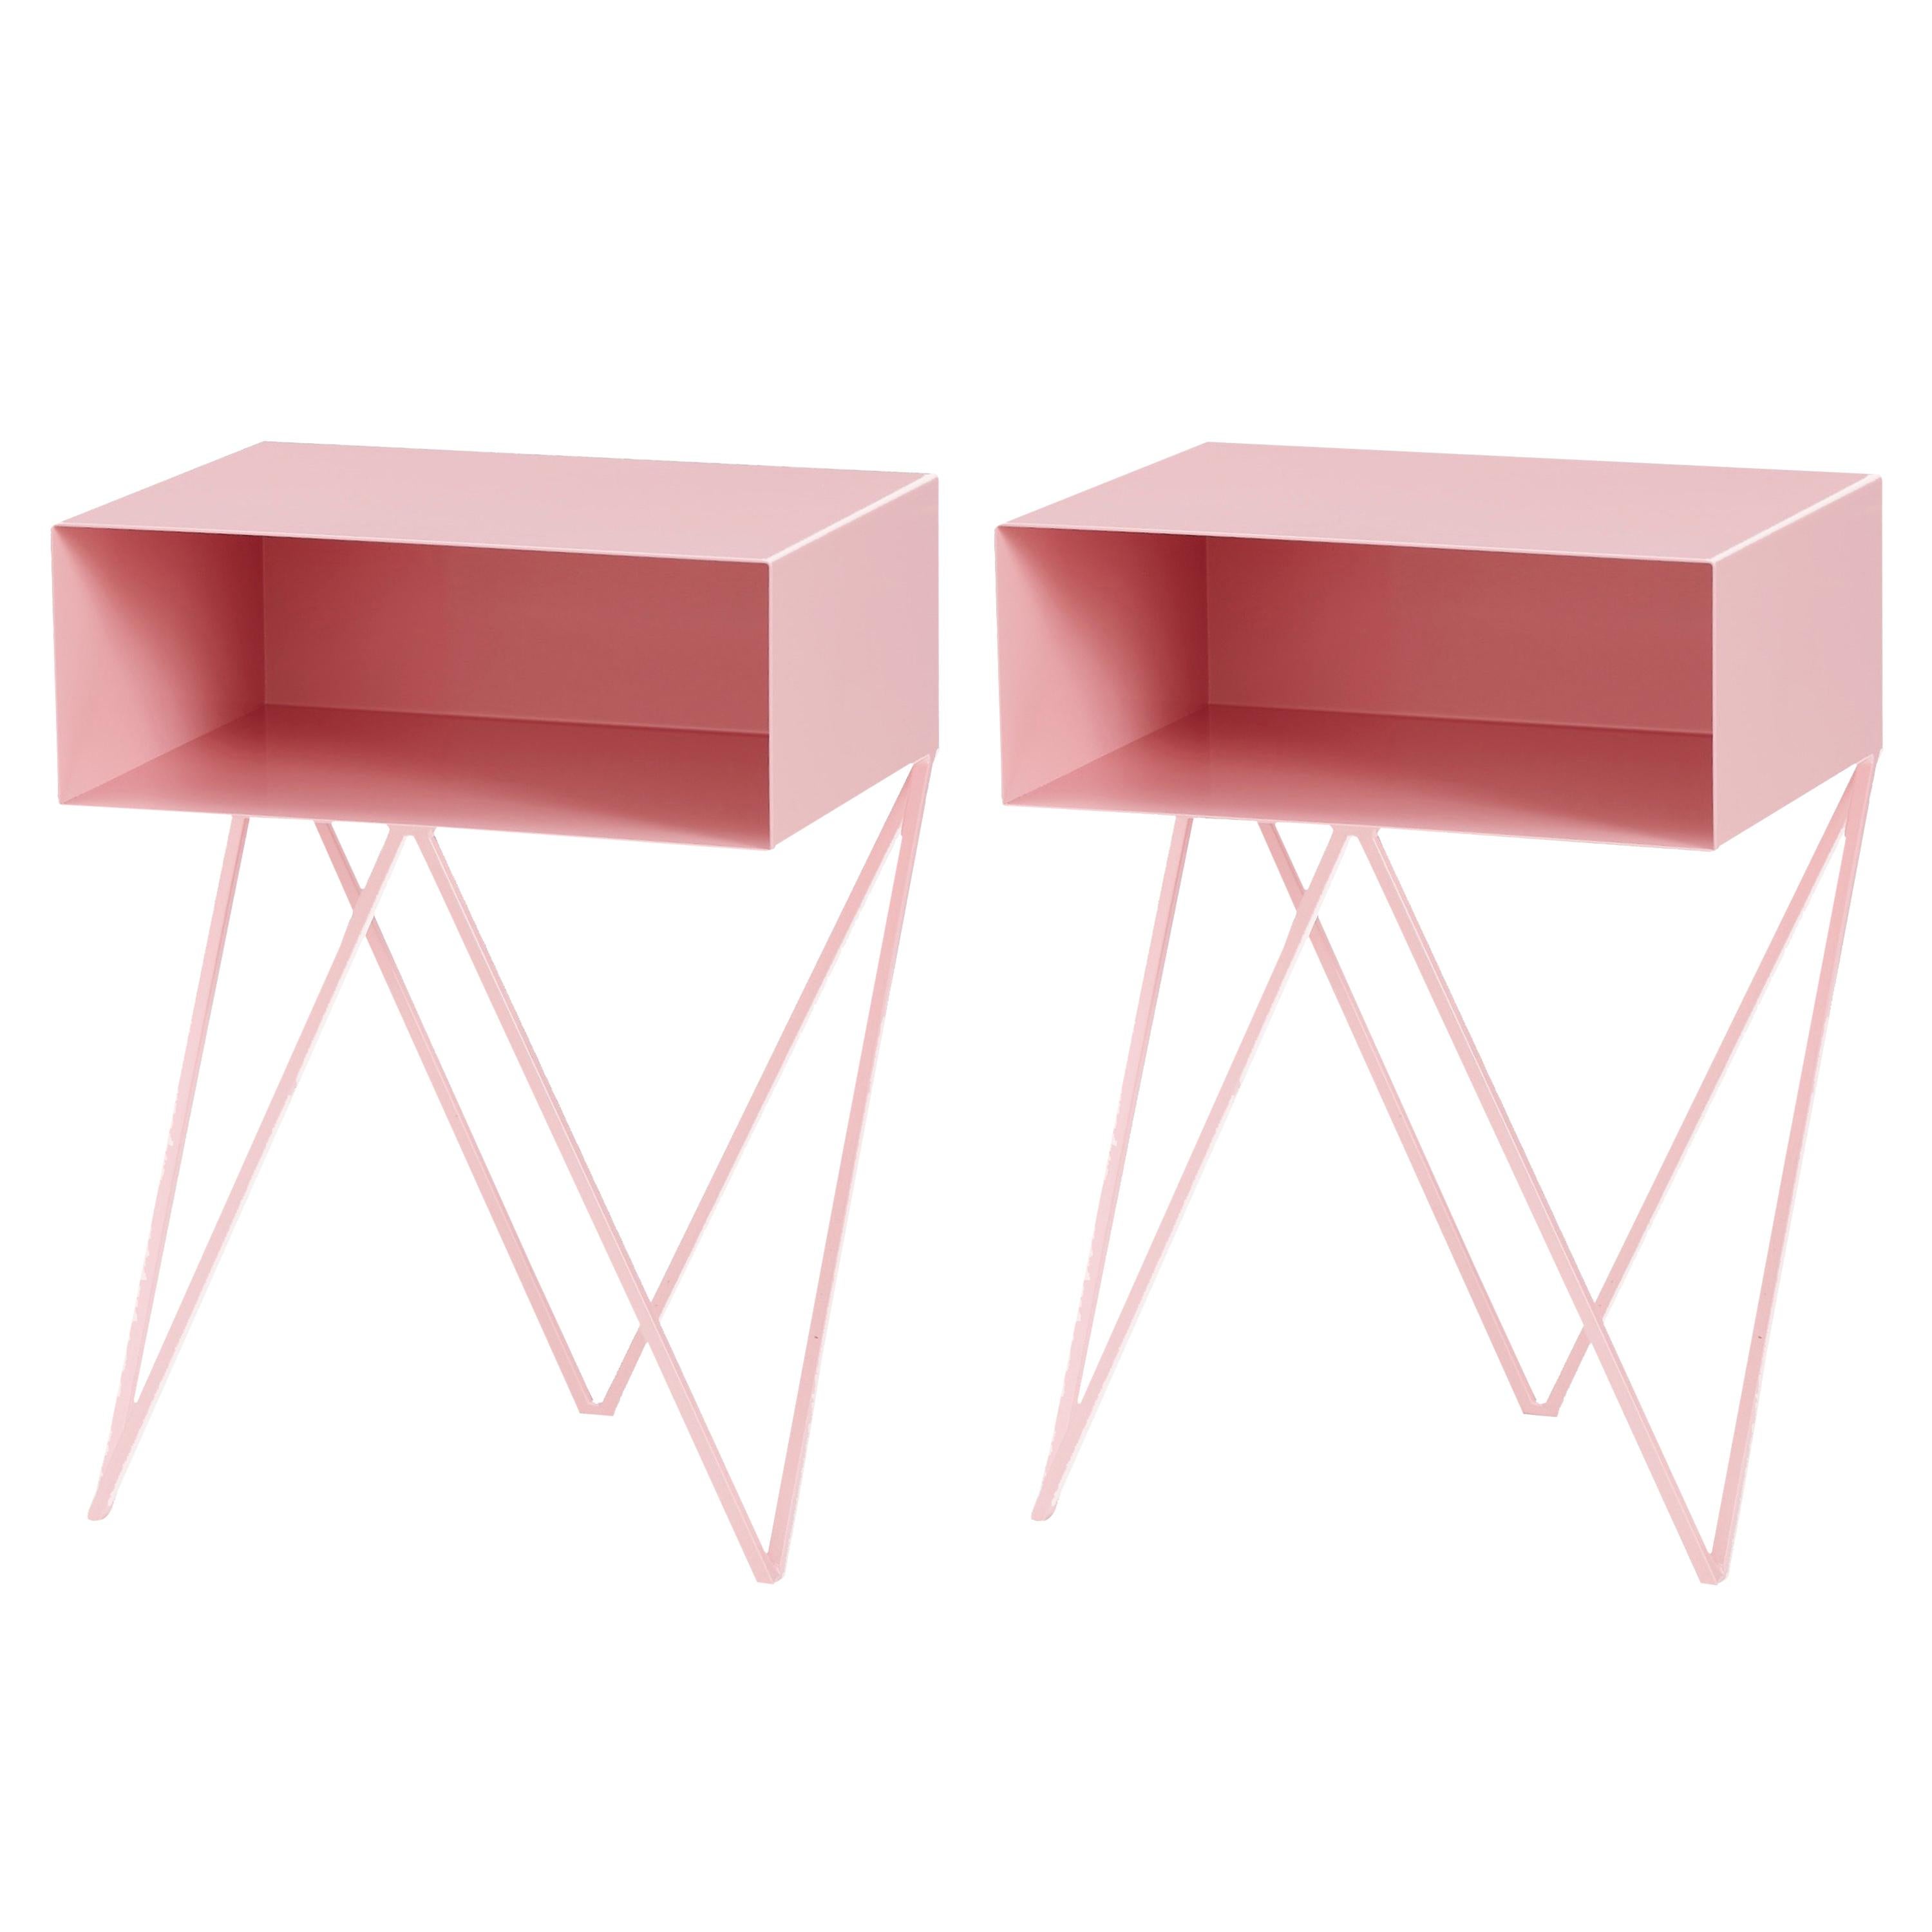 Pair of Pink Steel Robot Bedside Tables - Customisable Nightstands For Sale